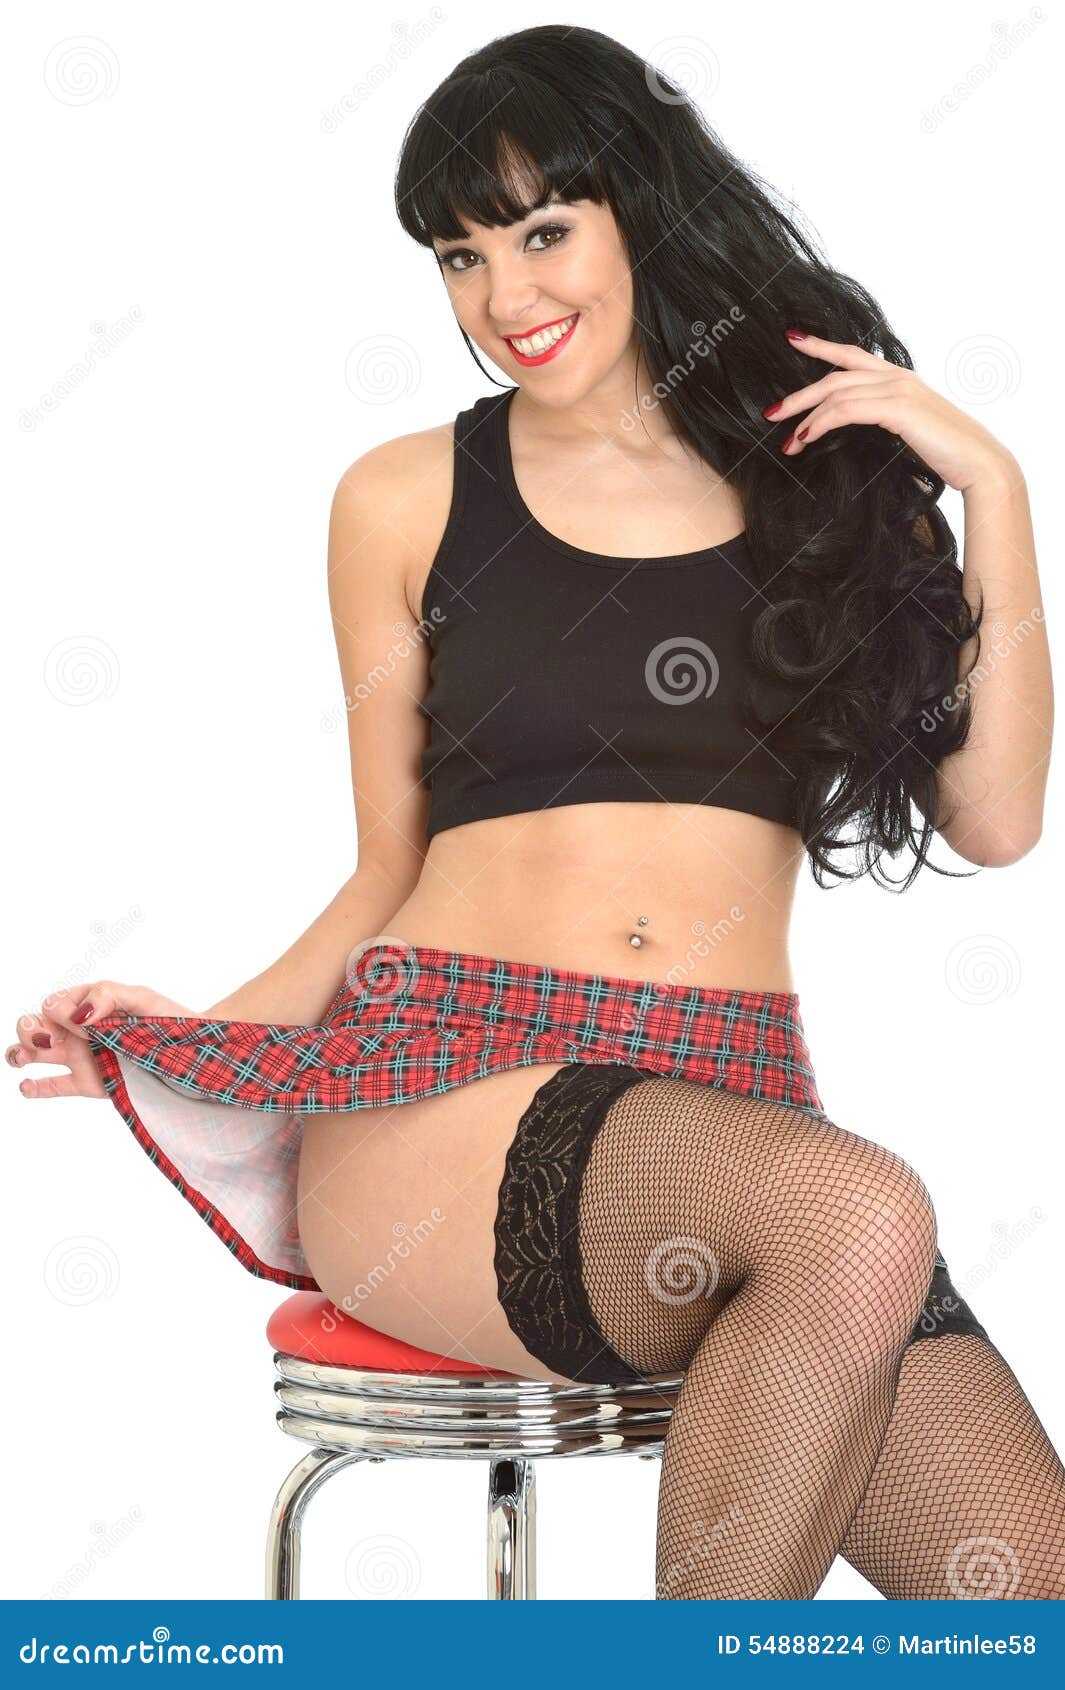 Flirtatious Glamorous Young Classic Pin Up Model In Fishnet Stockings